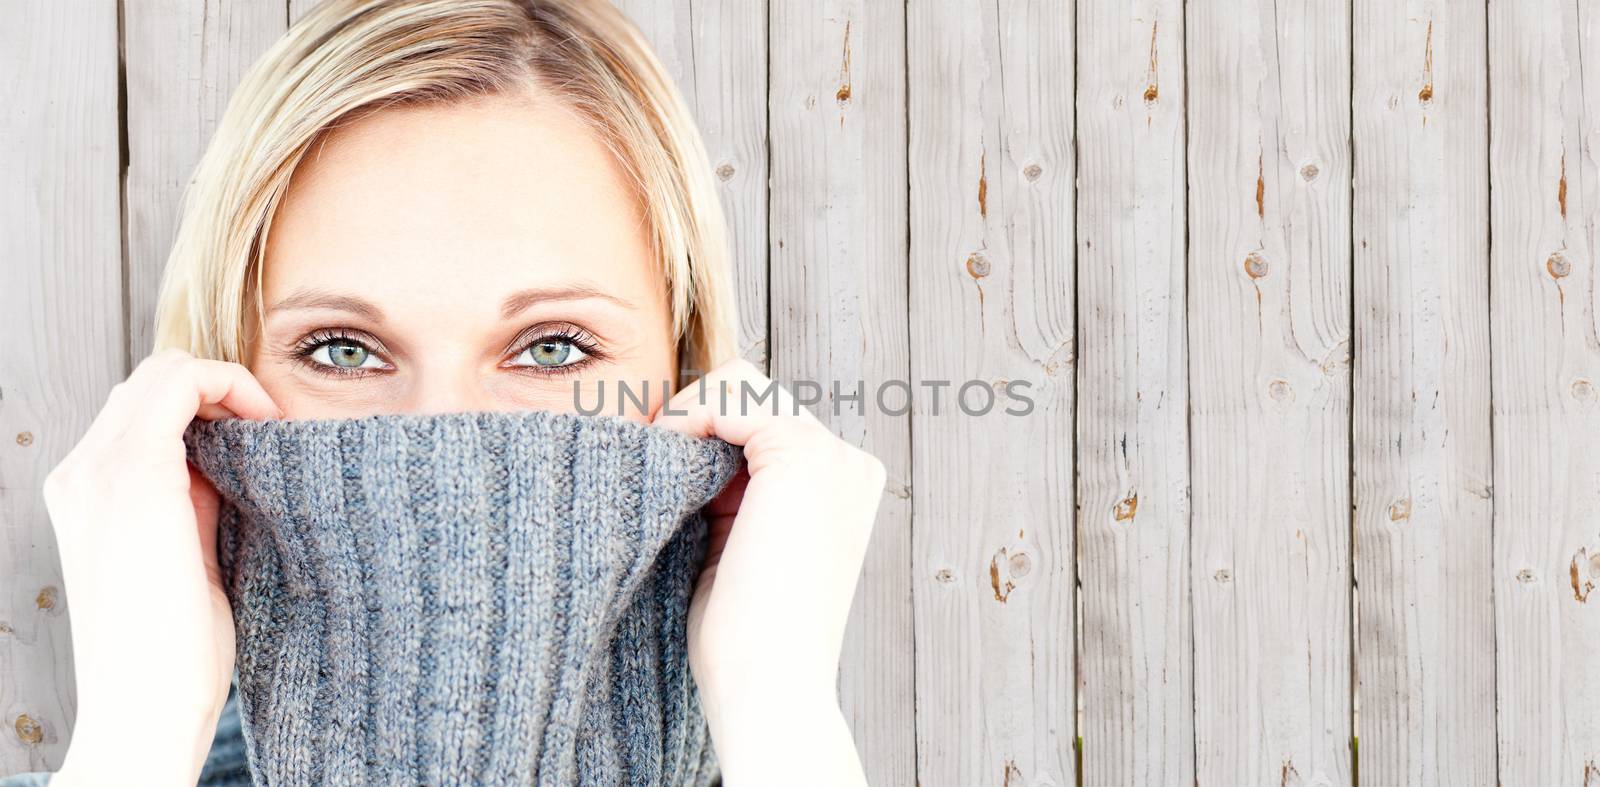 Delighted woman wearing a poloneck-sweater smiling at the camera against wooden background